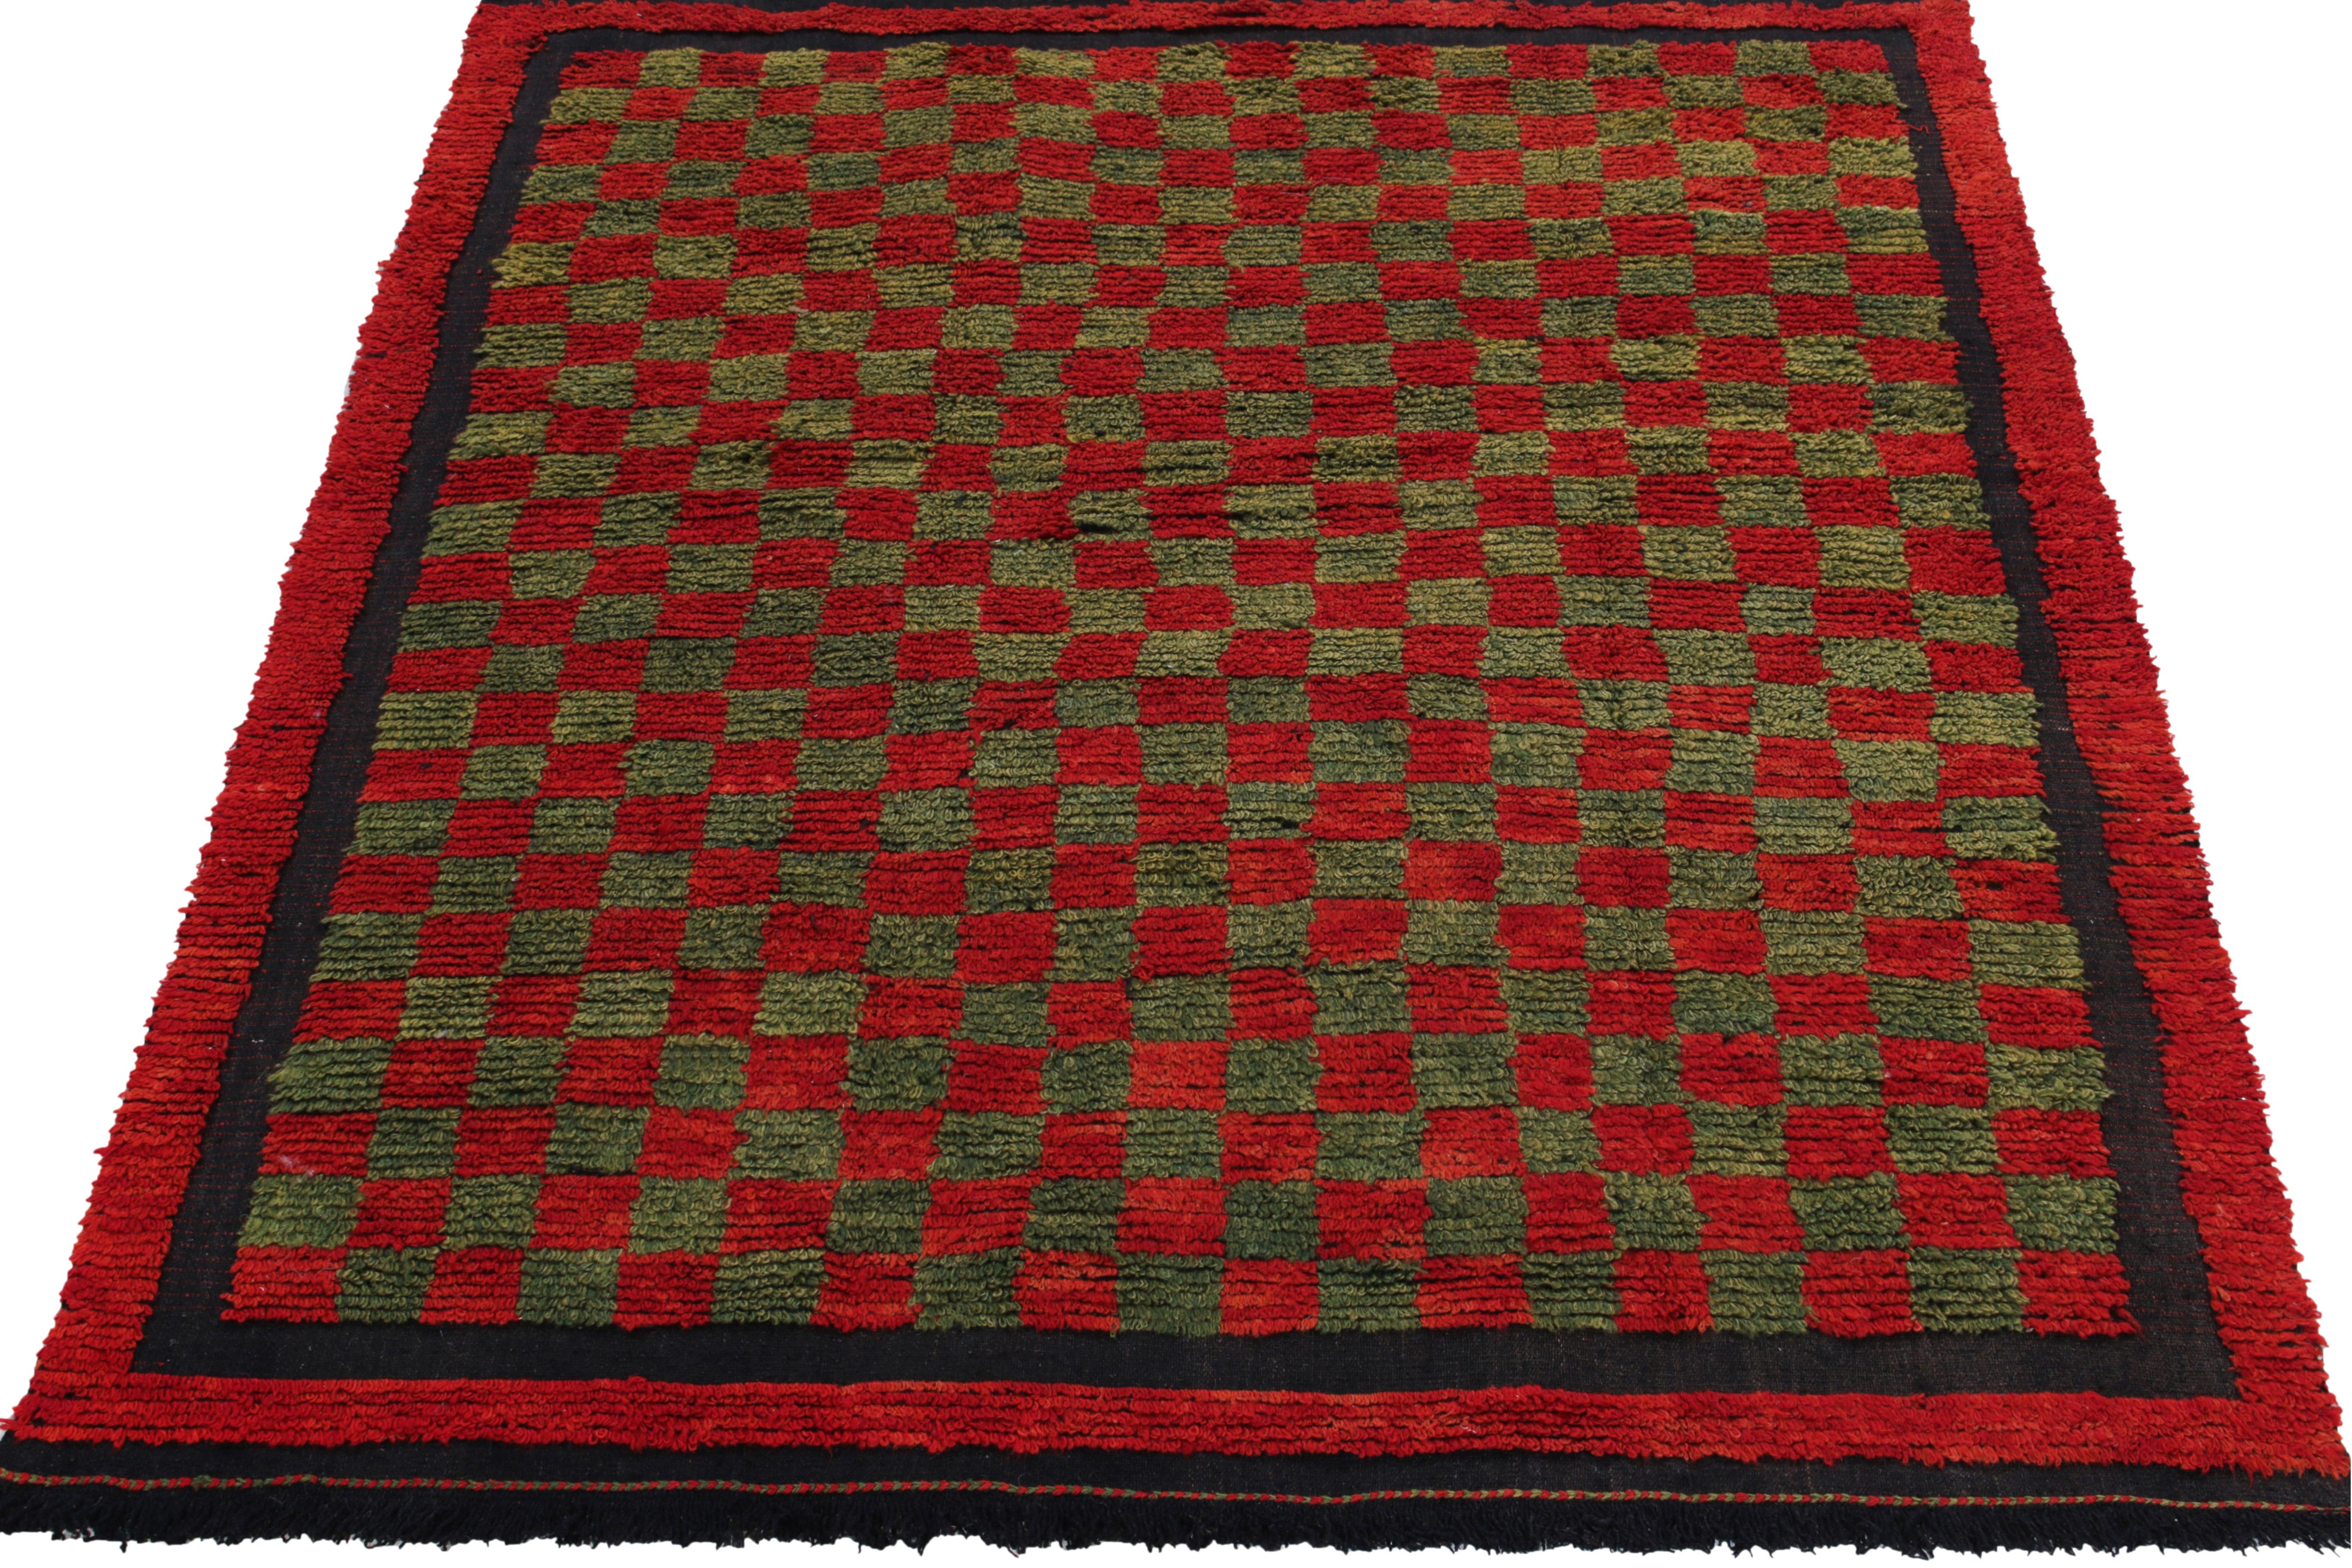 Originating from Turkey circa 1950-1960, this 4x6 vintage Tulu rug enjoys a bright red checkered pattern sitting boldly on luscious olive green for a delicious contrast all enveloped in similar red & navy blue tones. Hand-knotted in wool, the